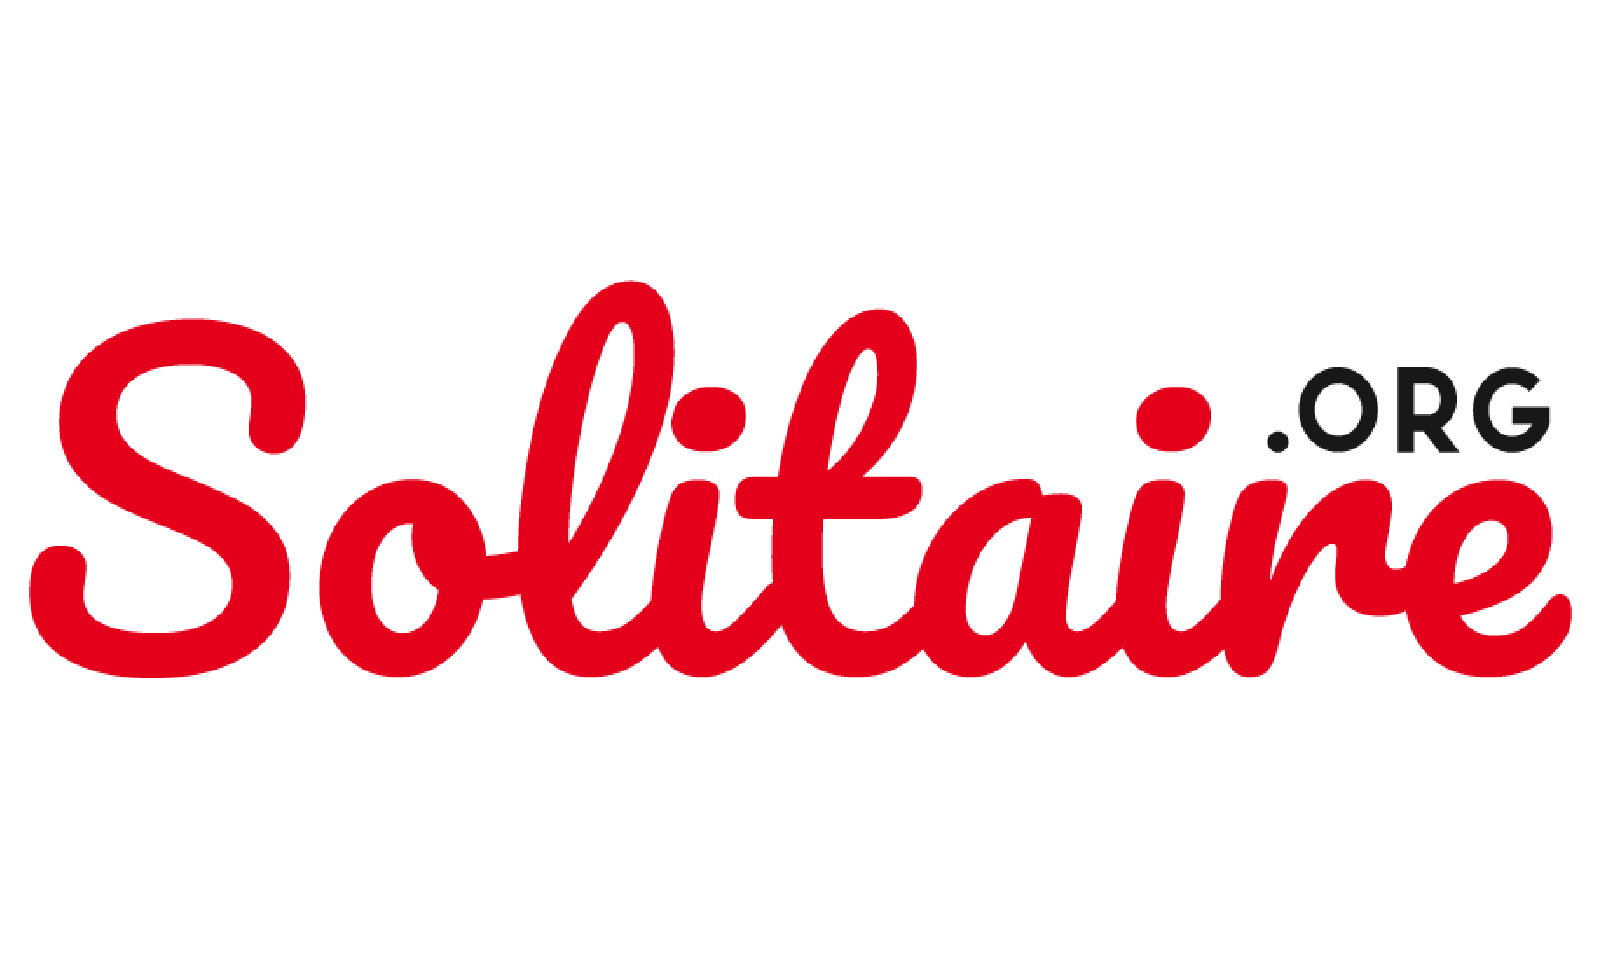 Solitaire Free Pack - Solitaire Games Online